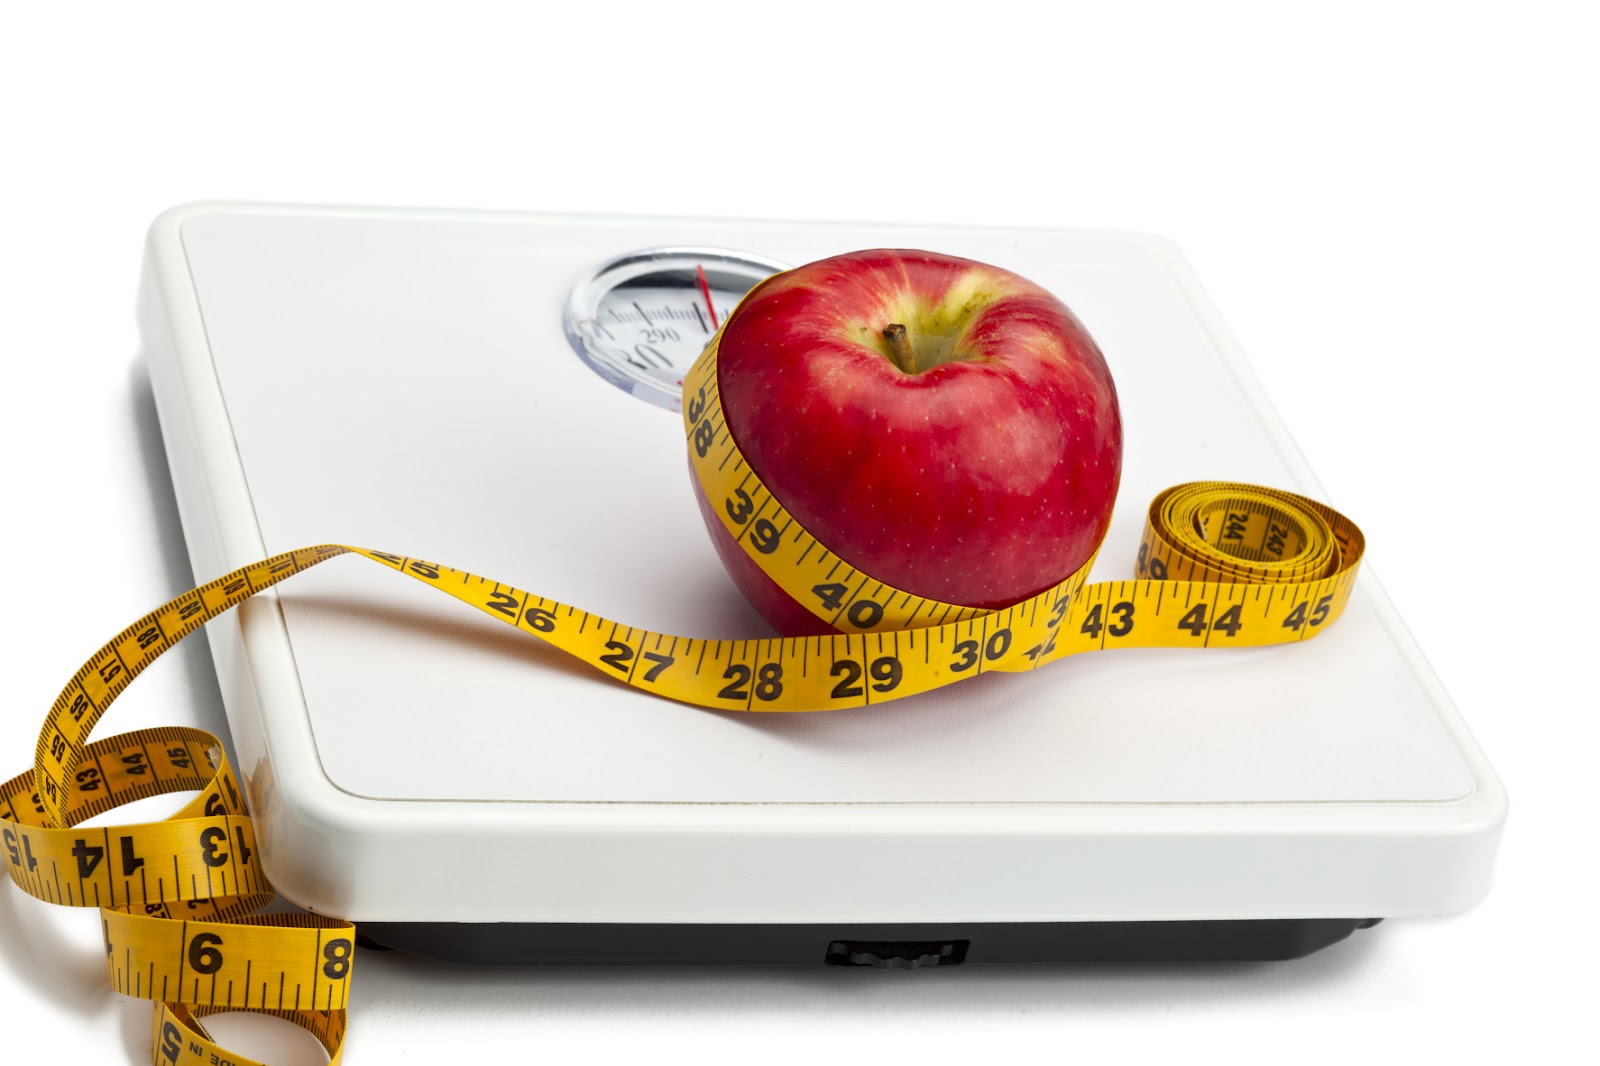 kozzi-apple-with-measuring-tape-on-weight-scale-1774x1183